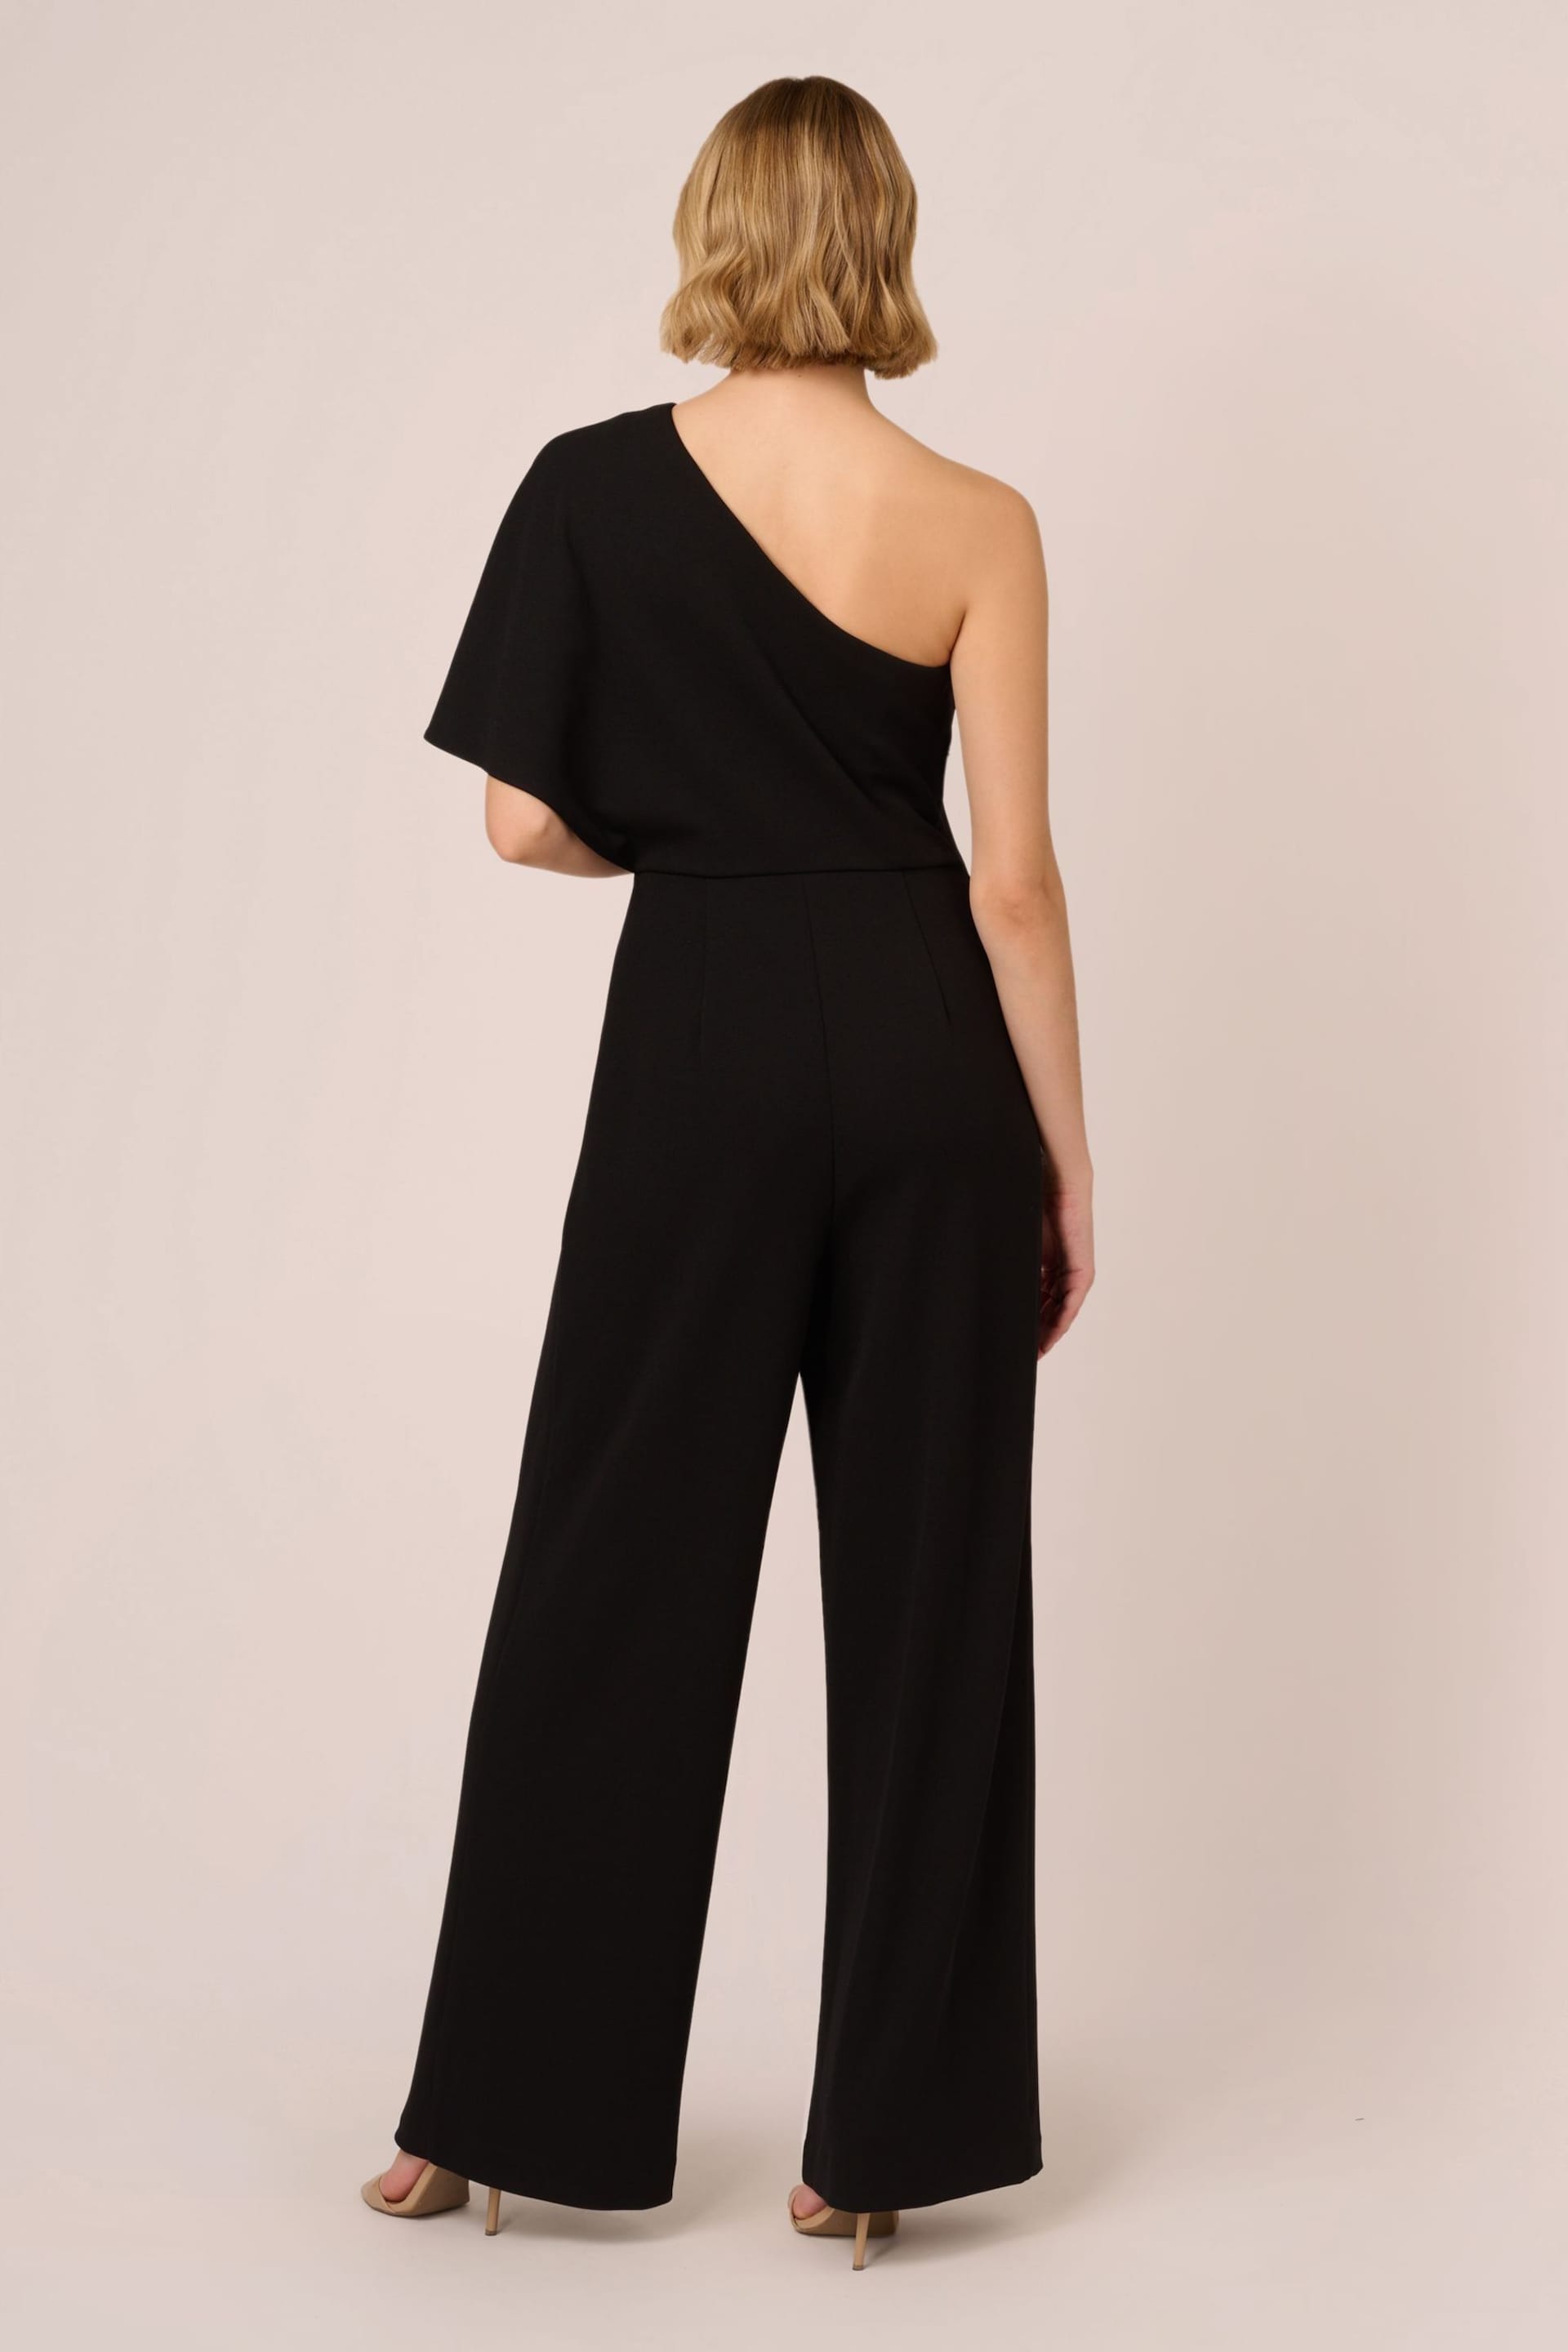 Adrianna Papell Colorblock Overlay Black Jumpsuit - Image 2 of 7